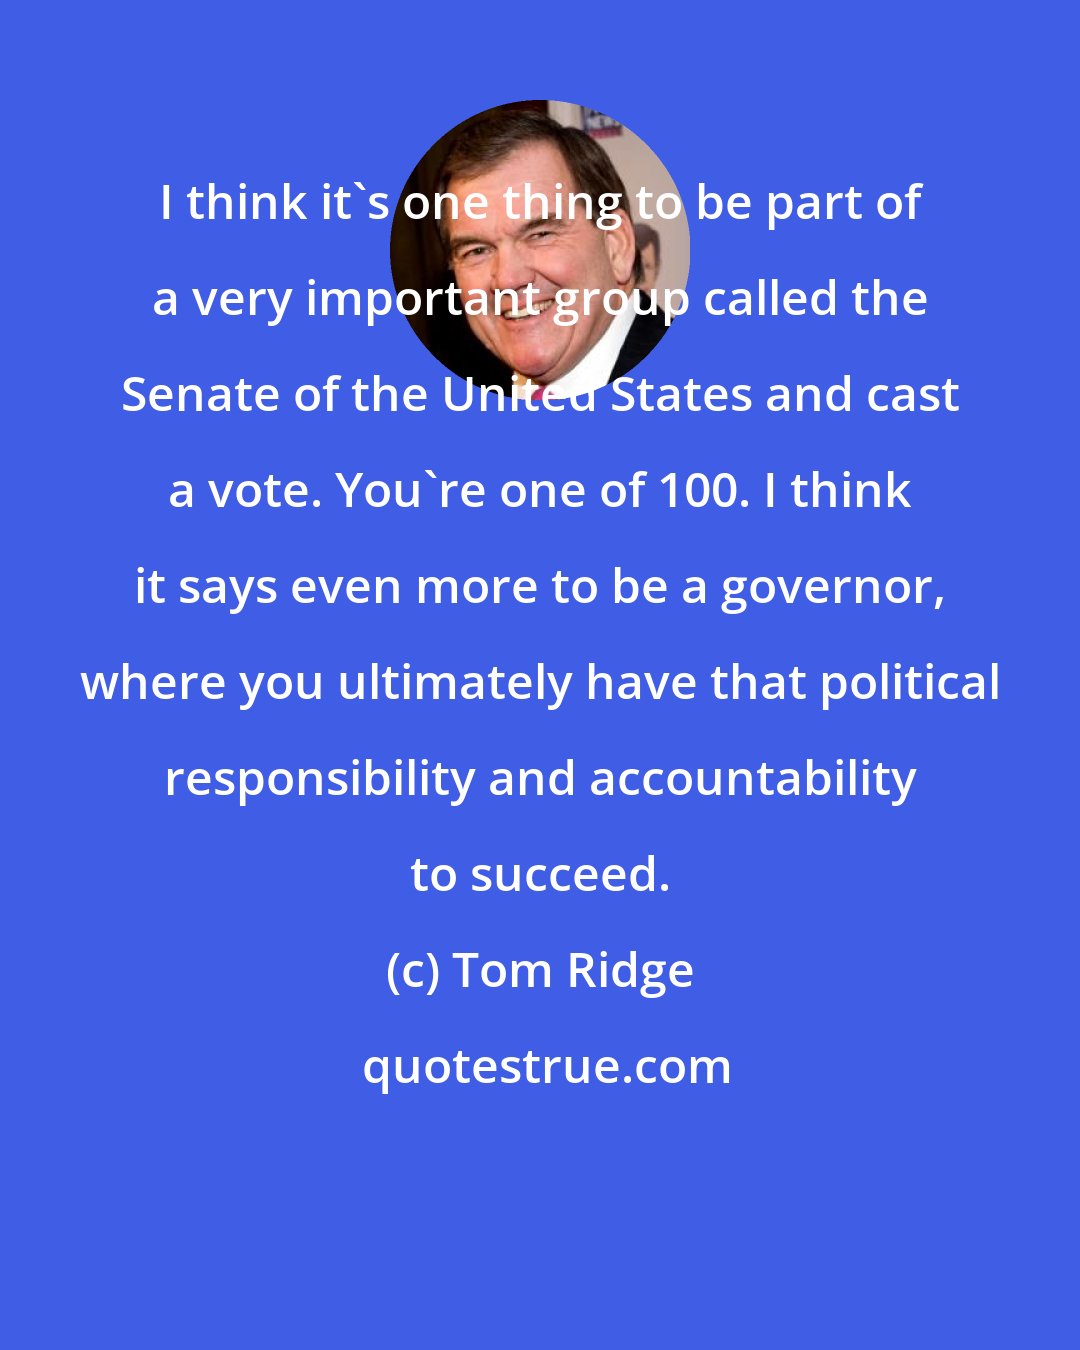 Tom Ridge: I think it's one thing to be part of a very important group called the Senate of the United States and cast a vote. You're one of 100. I think it says even more to be a governor, where you ultimately have that political responsibility and accountability to succeed.